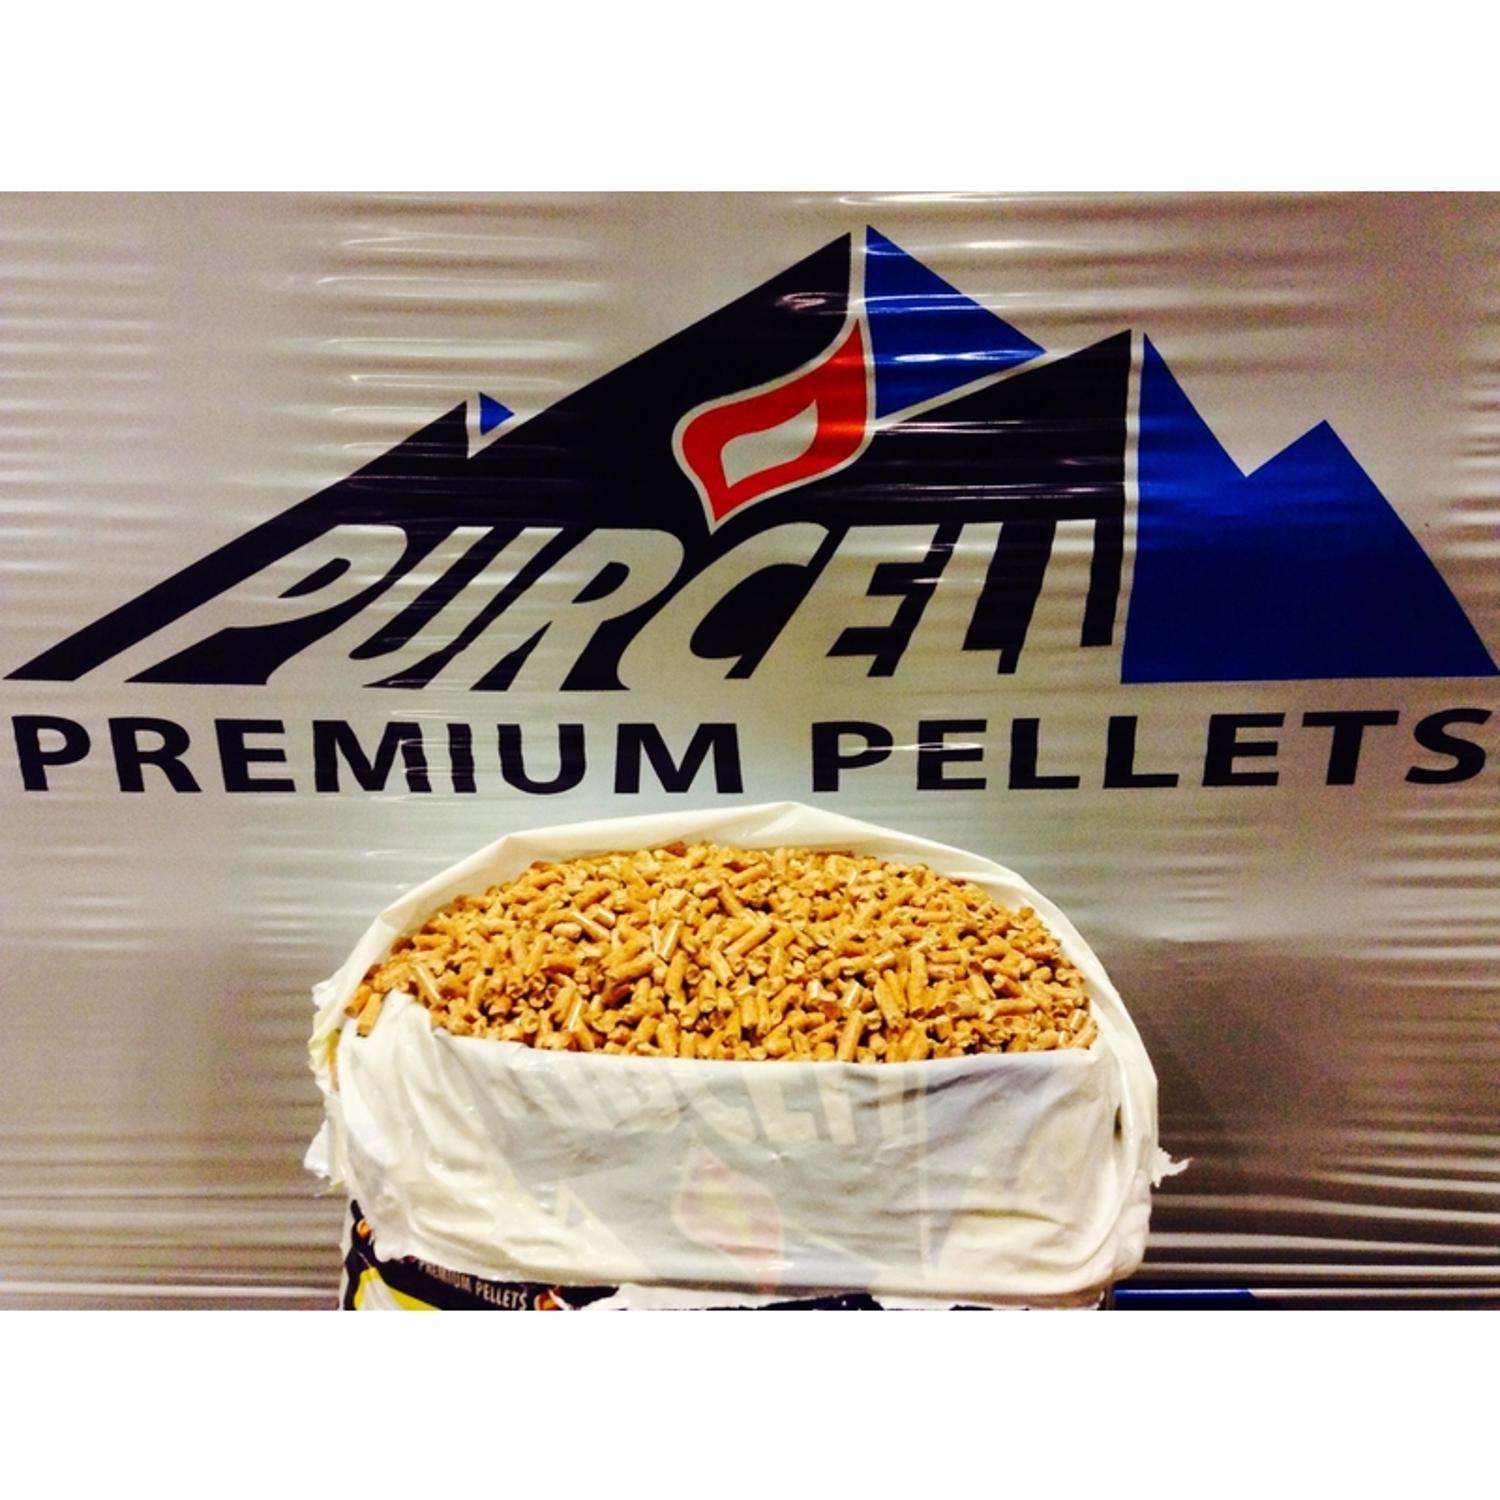 Wood Pellet Accessories From Wood Pellet Products in Oregon